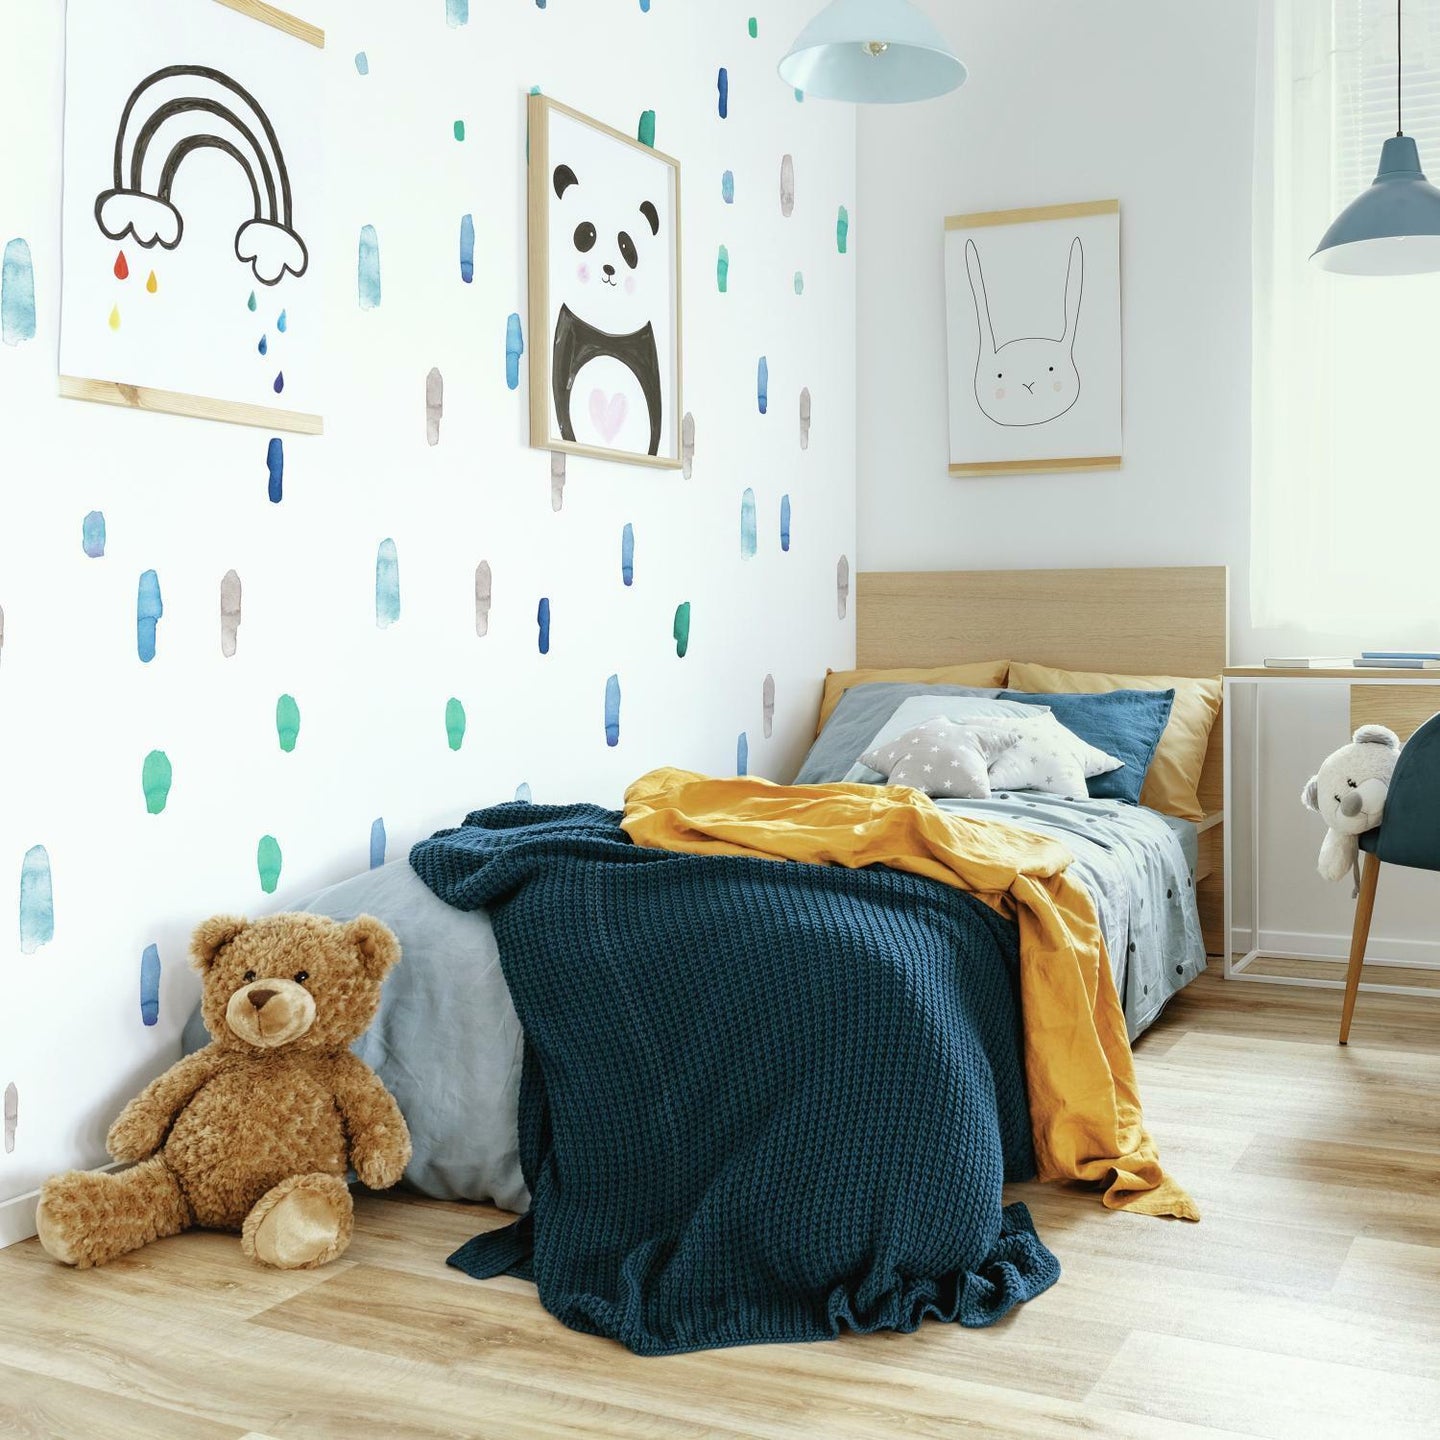 COOL WATERCOLOR SWATCH PEEL AND STICK WALL DECALS